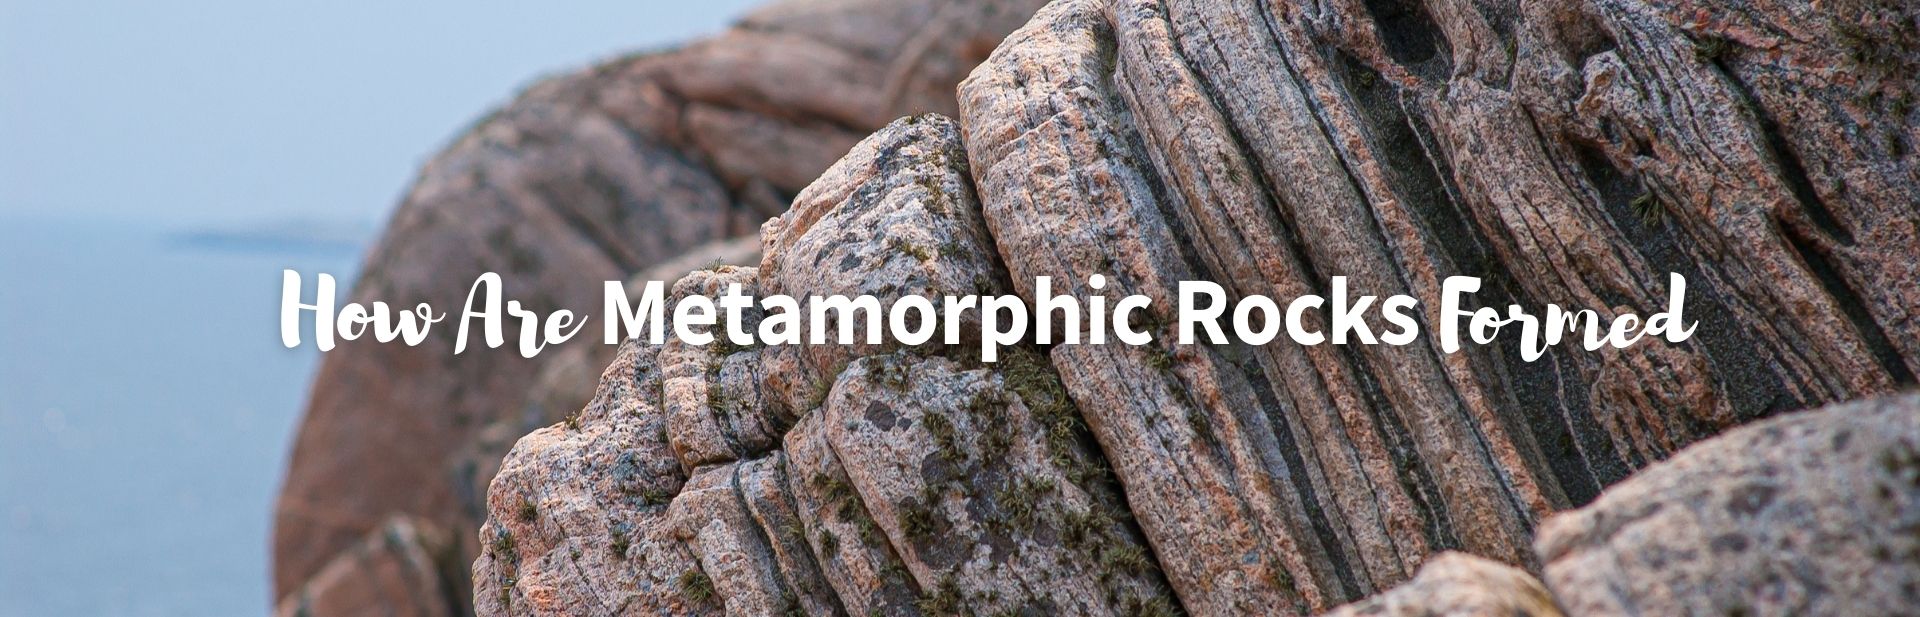 How Are Metamorphic Rocks Formed? (Full Explanation)